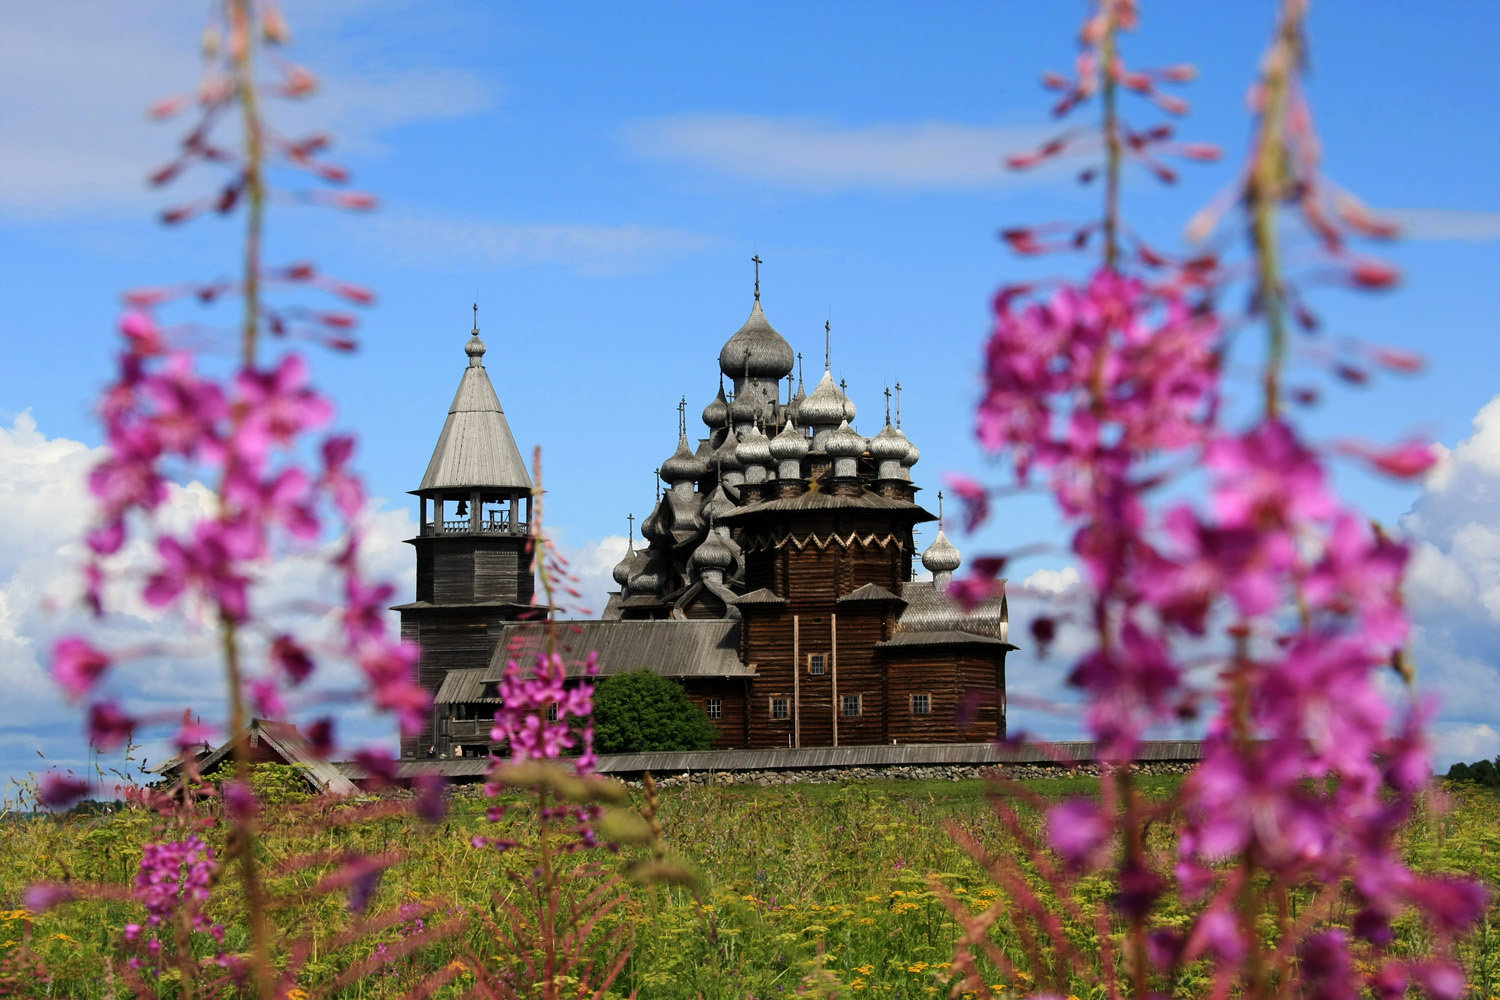 The Kizhi State History, Architecture and Ethnography Museum and Protected Nature Area 